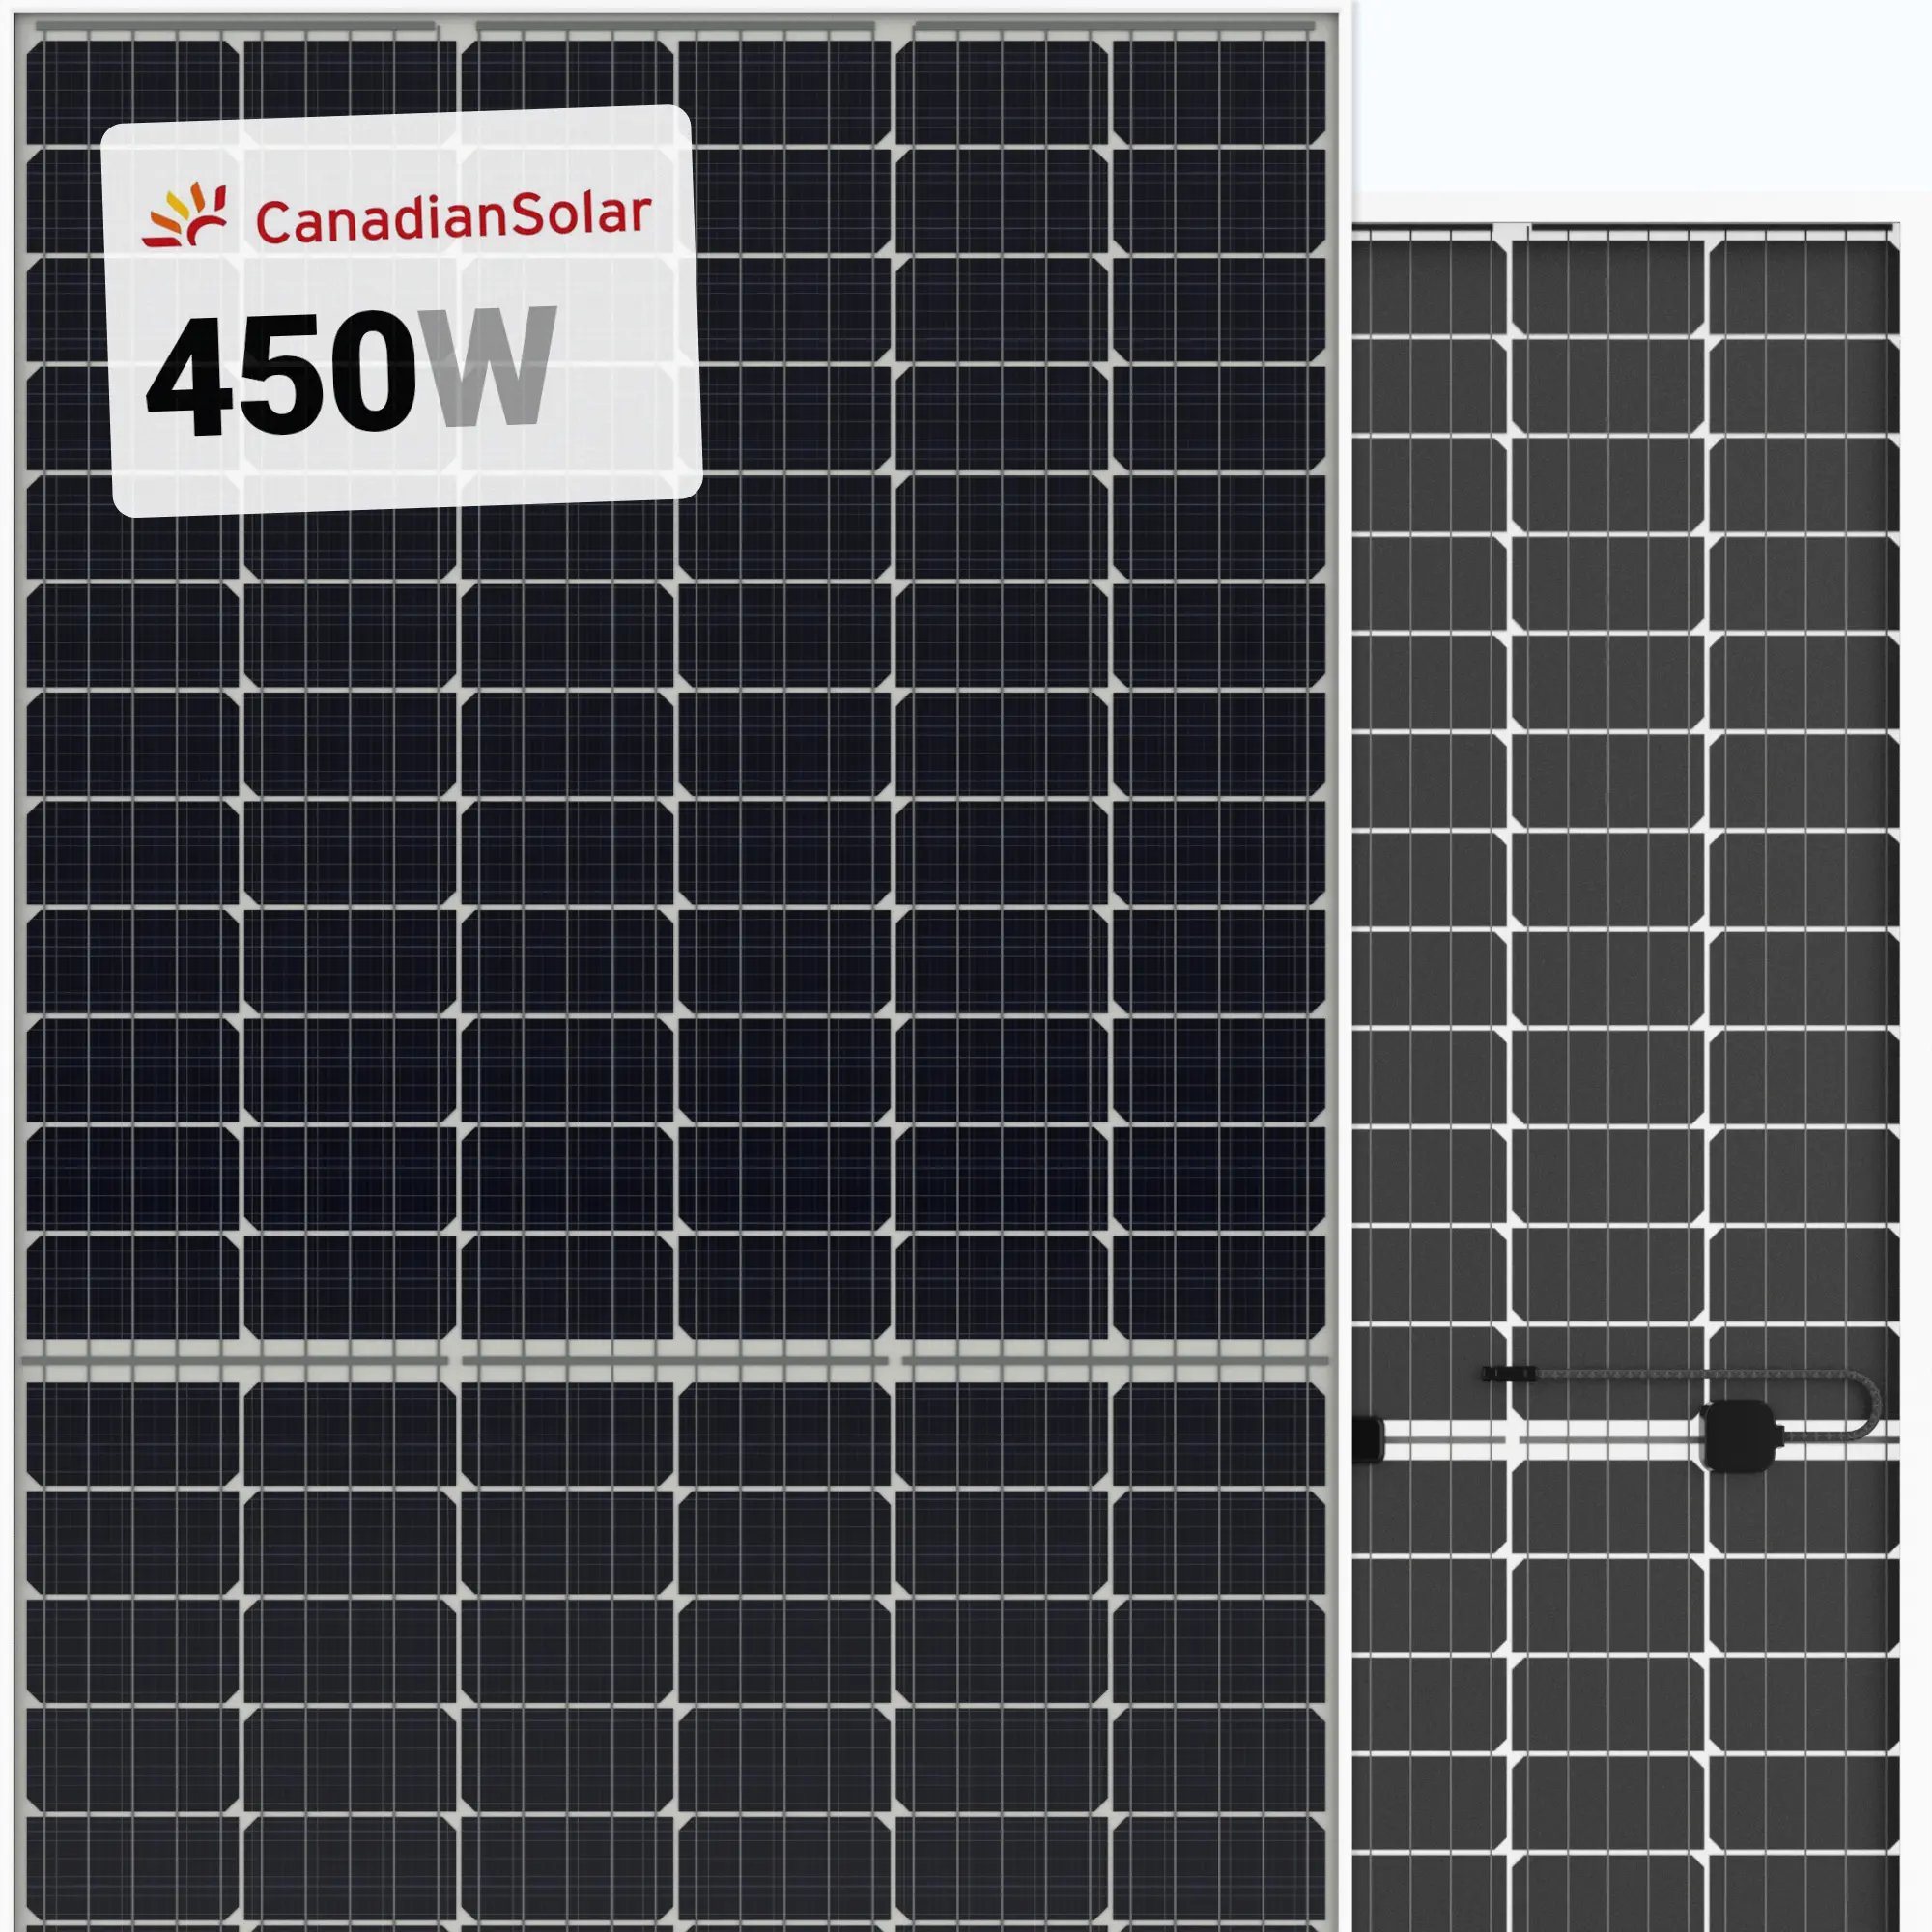 canadian solar panels 450w price - What is Canadian solar panel